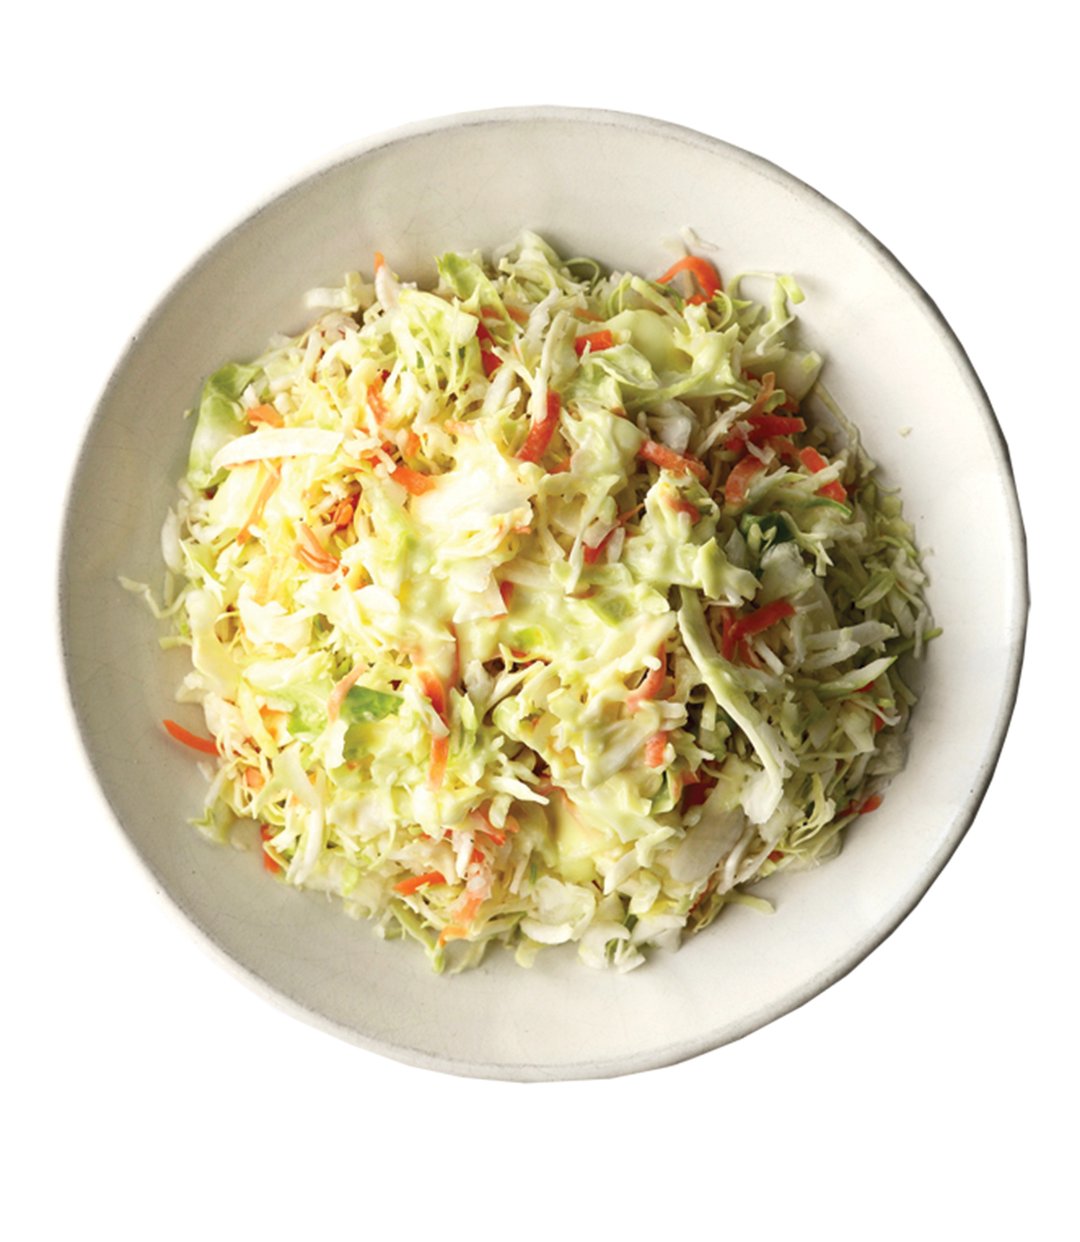 Large Coleslaw with Dressing